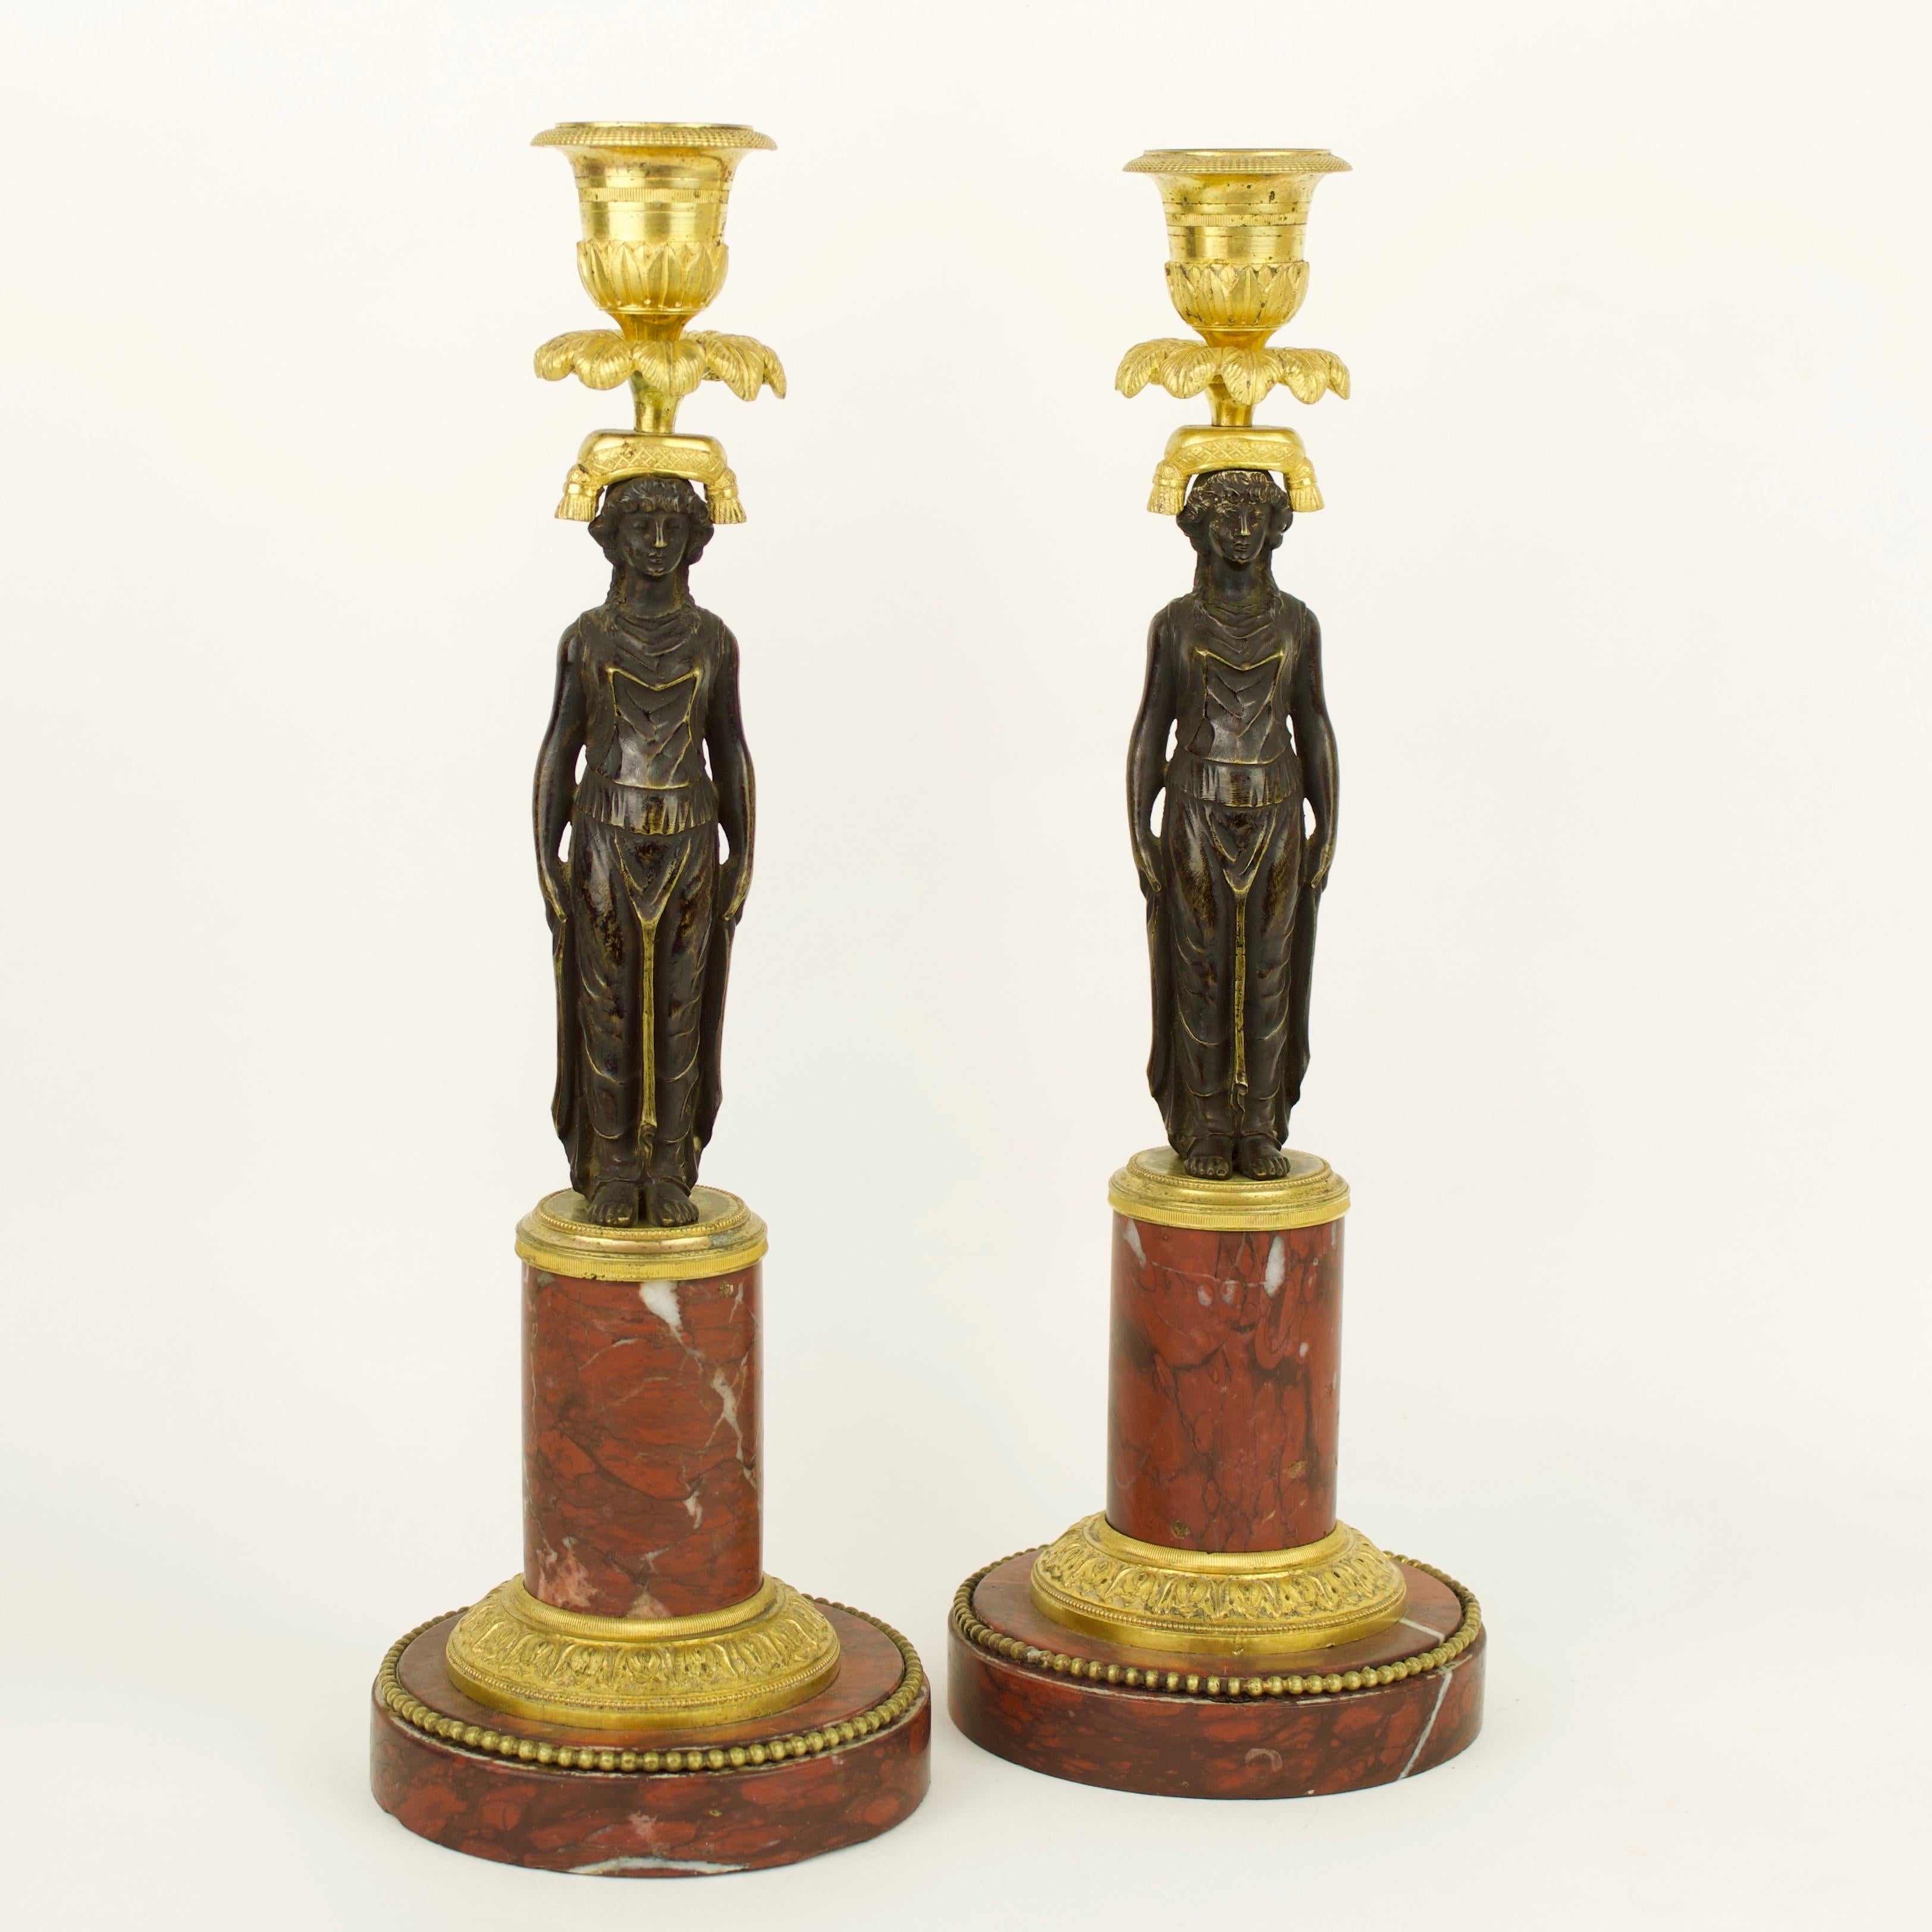 A beautiful French early 19th century Empire pair of ormolu and patinated bronze candlesticks with female figure decoration in the manner of Claude Galle: 

Each candlestick with a patinated bronze female caryatid wearing a classical tunic,